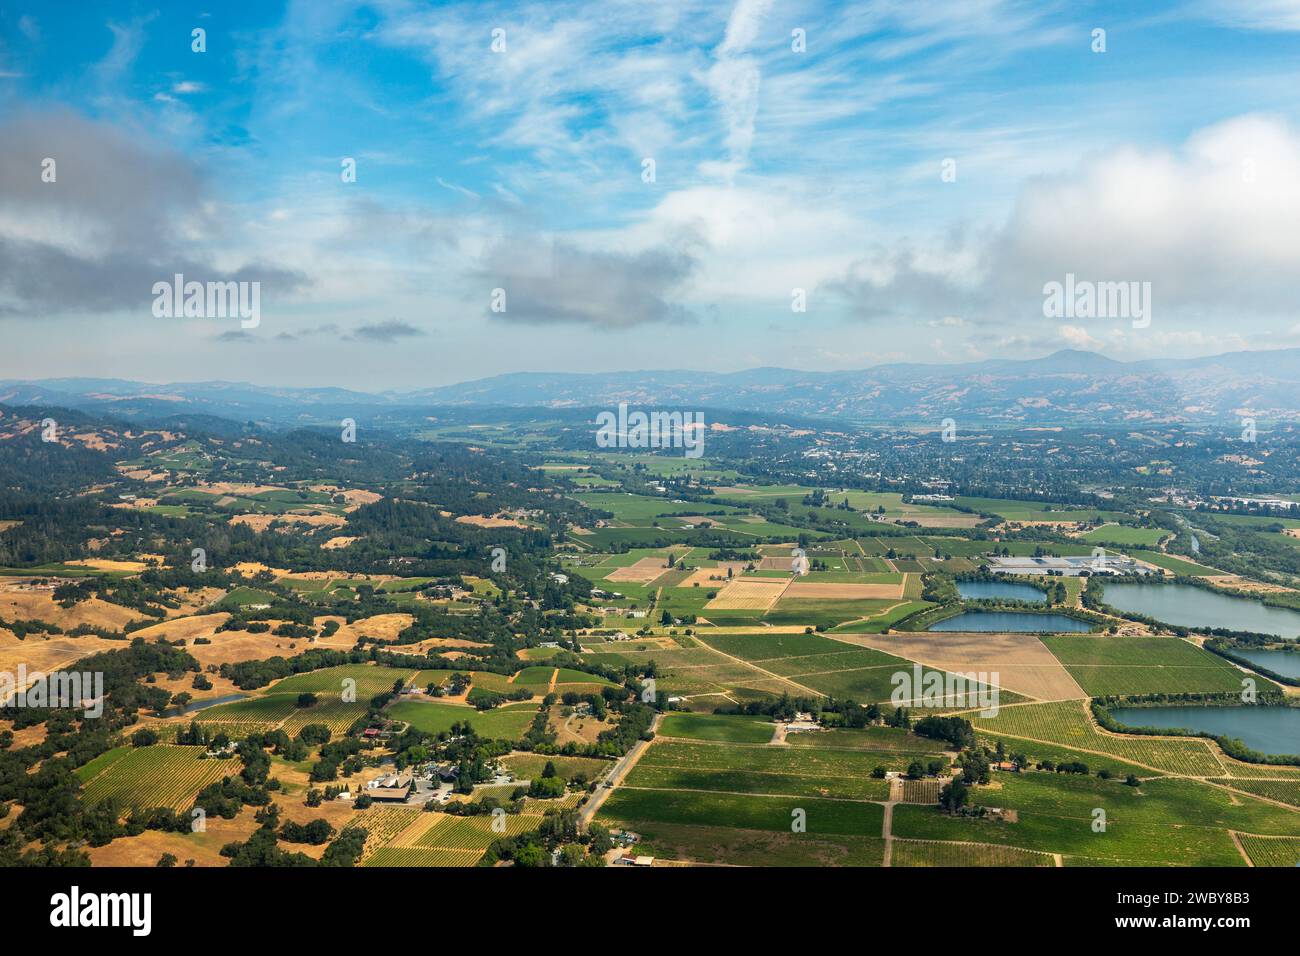 Aerial view of green rows of plants in farm fields, vineyards, and the agricultural towns of norther California Stock Photo